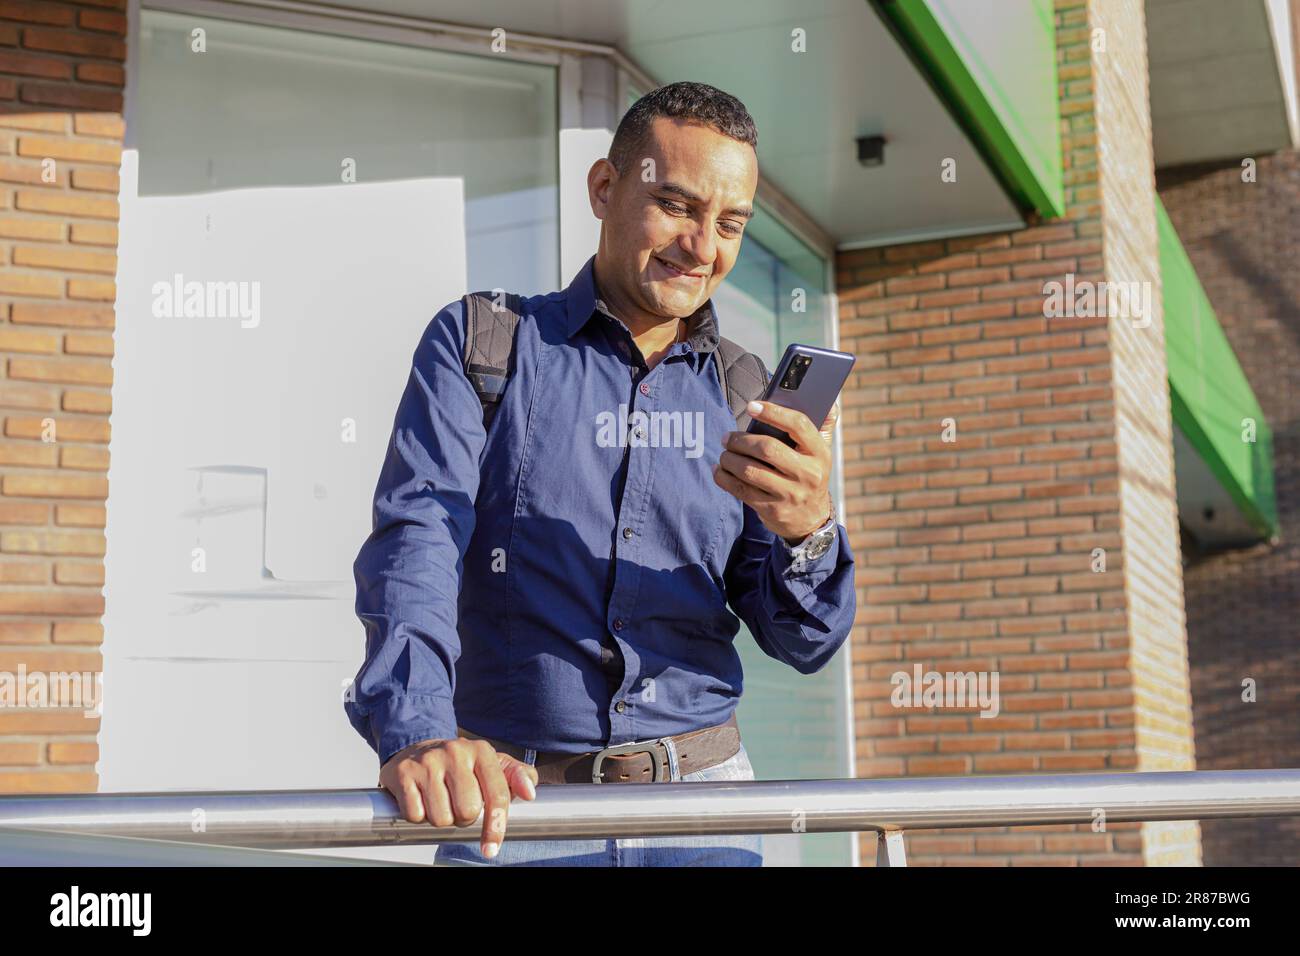 Smiling young latin man looking at his mobile phone. Stock Photo